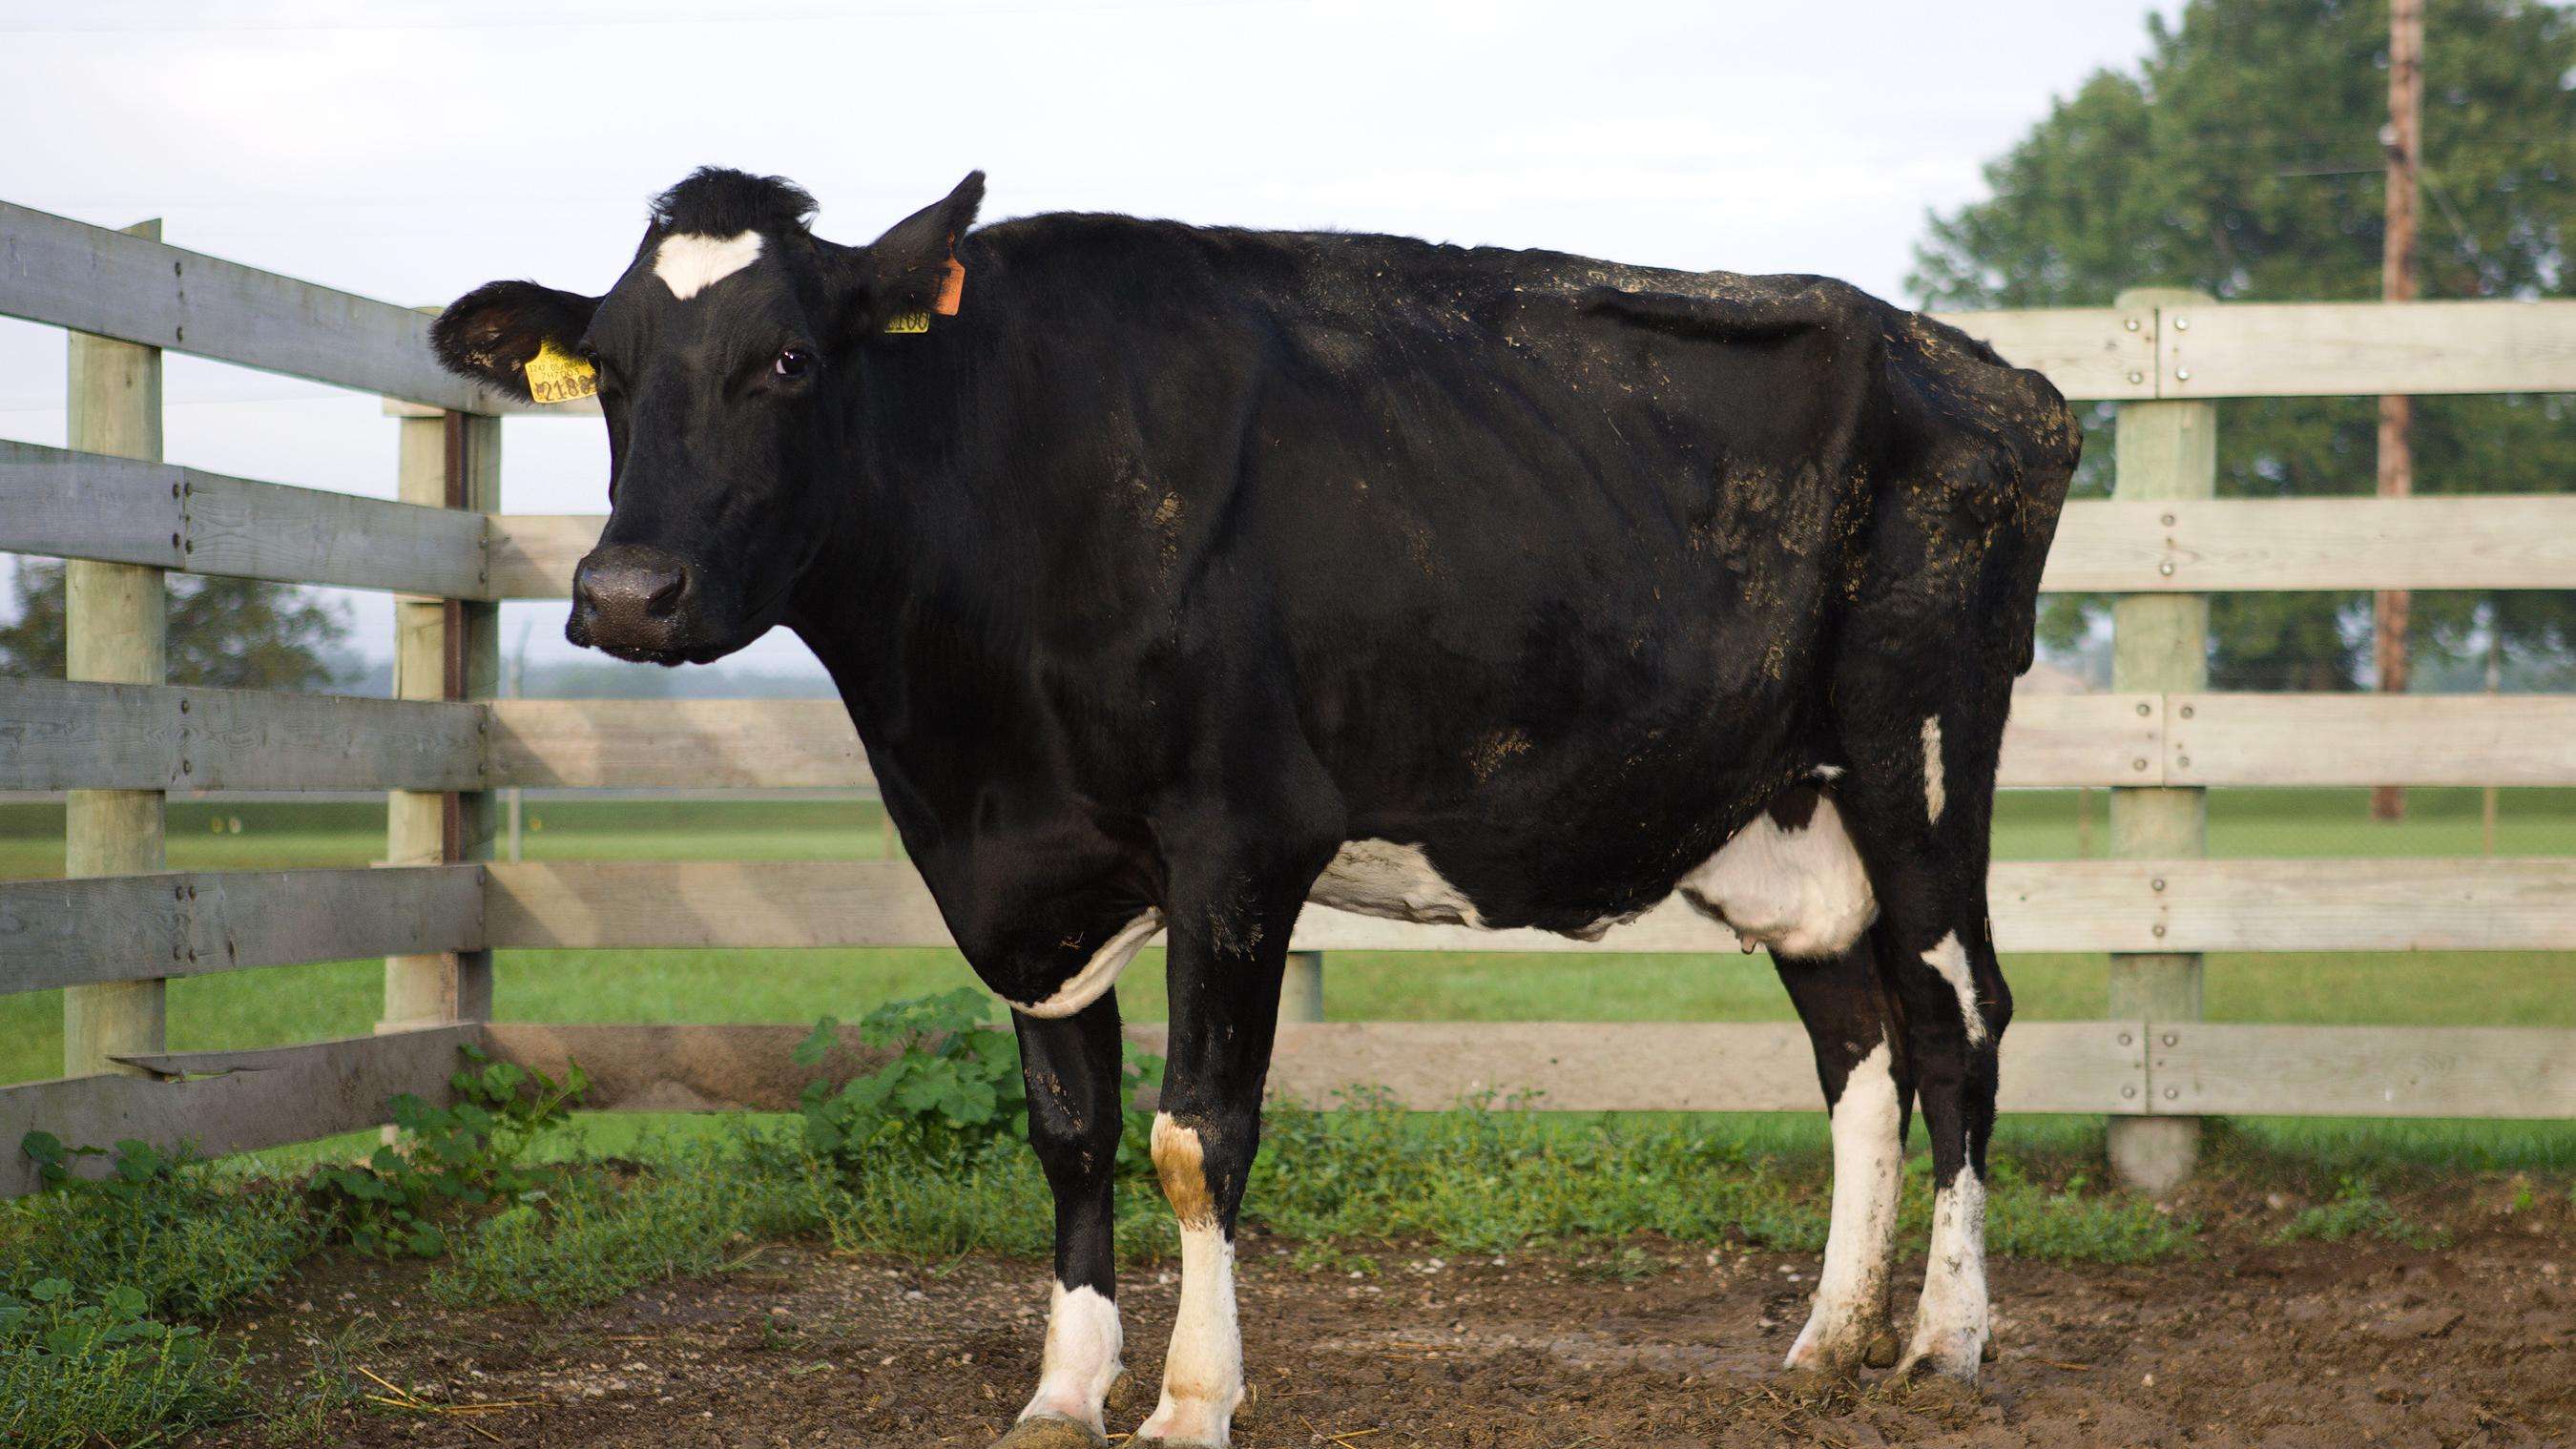 Black cow with white patches on its forehead, underbelly, and lower legs.